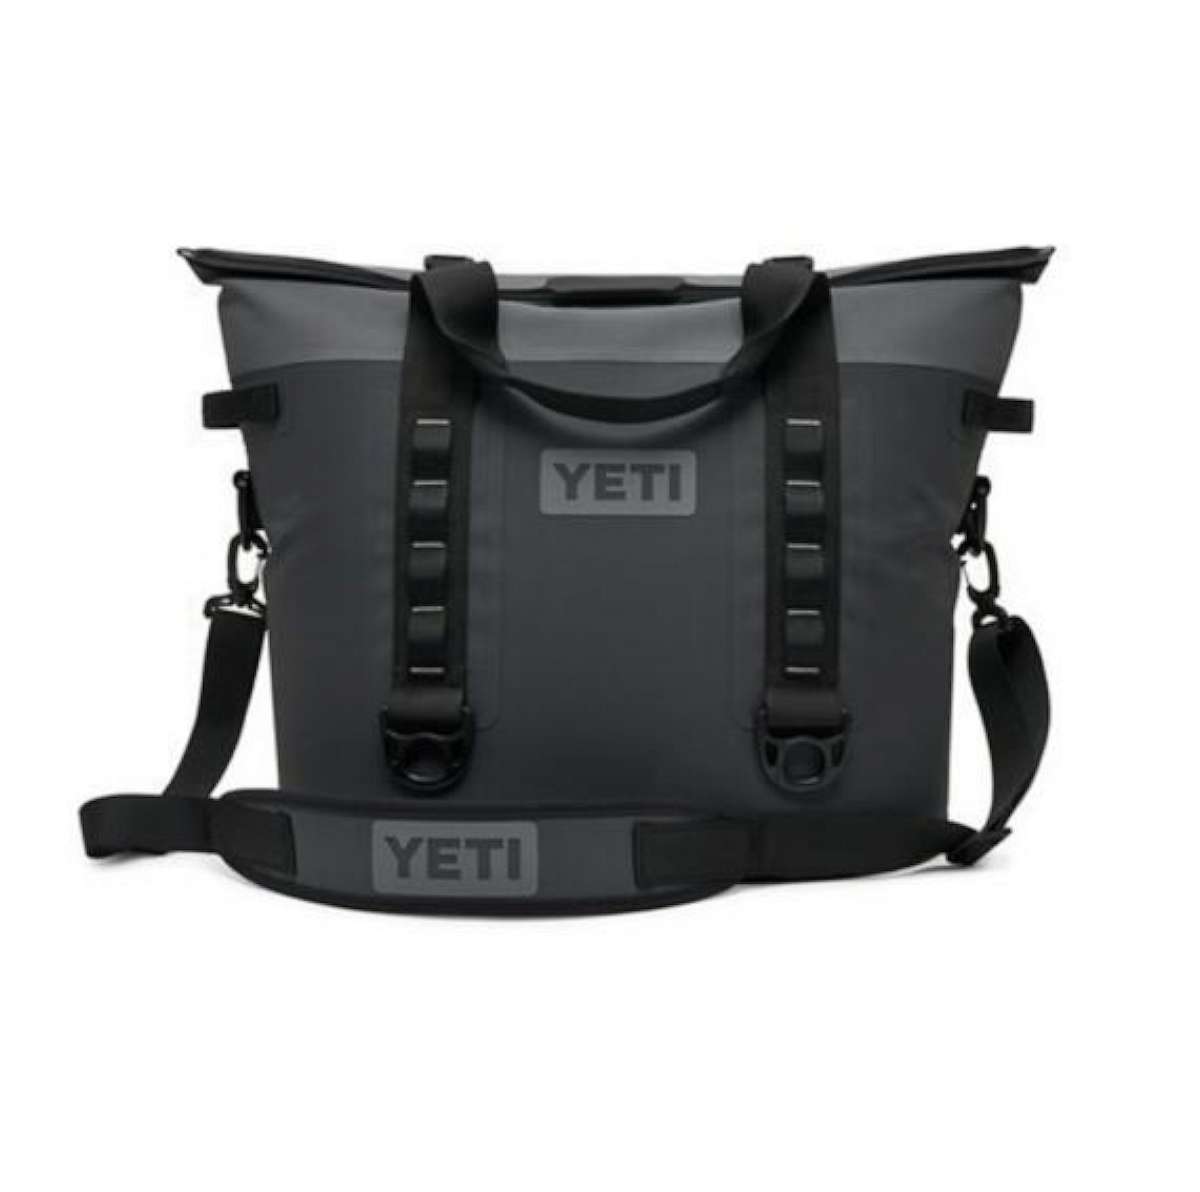 https://s.abcnews.com/images/GMA/yeti-recalled-2-ht-ps-230309_1678385941889_hpEmbed.jpg